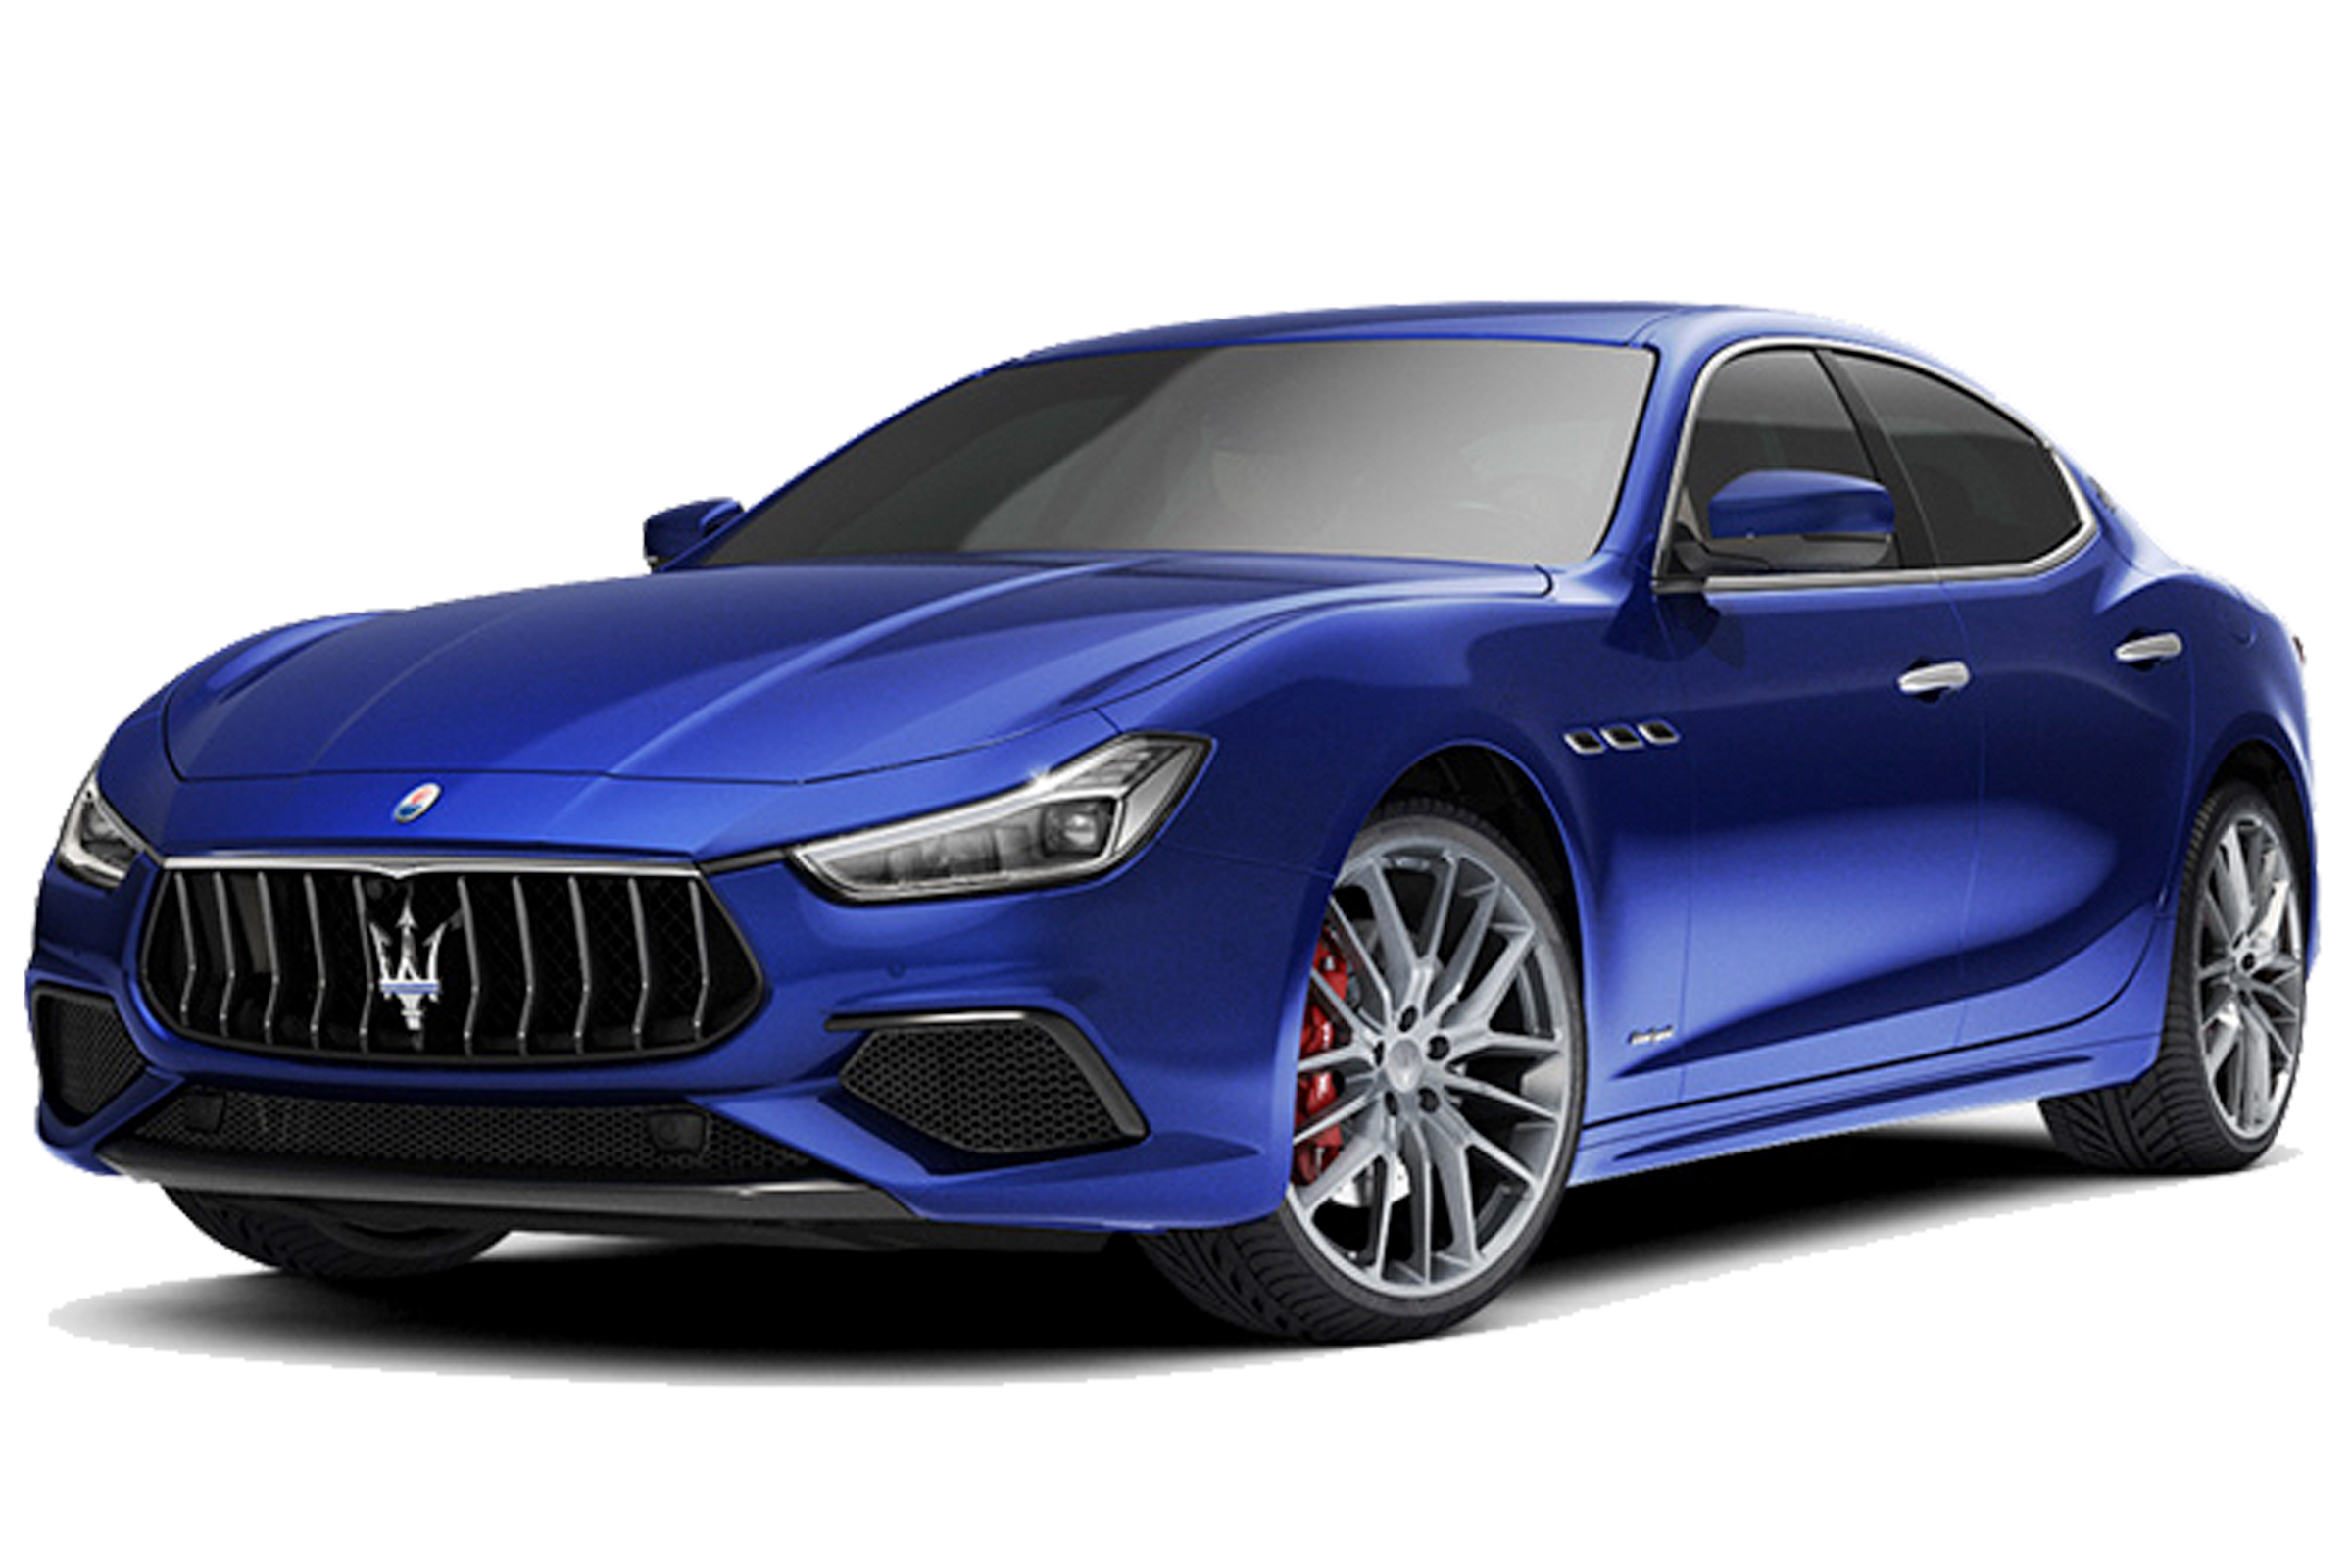 Maserati Ghibli Owner Reviews Mpg Problems Reliability Review Carbuyer